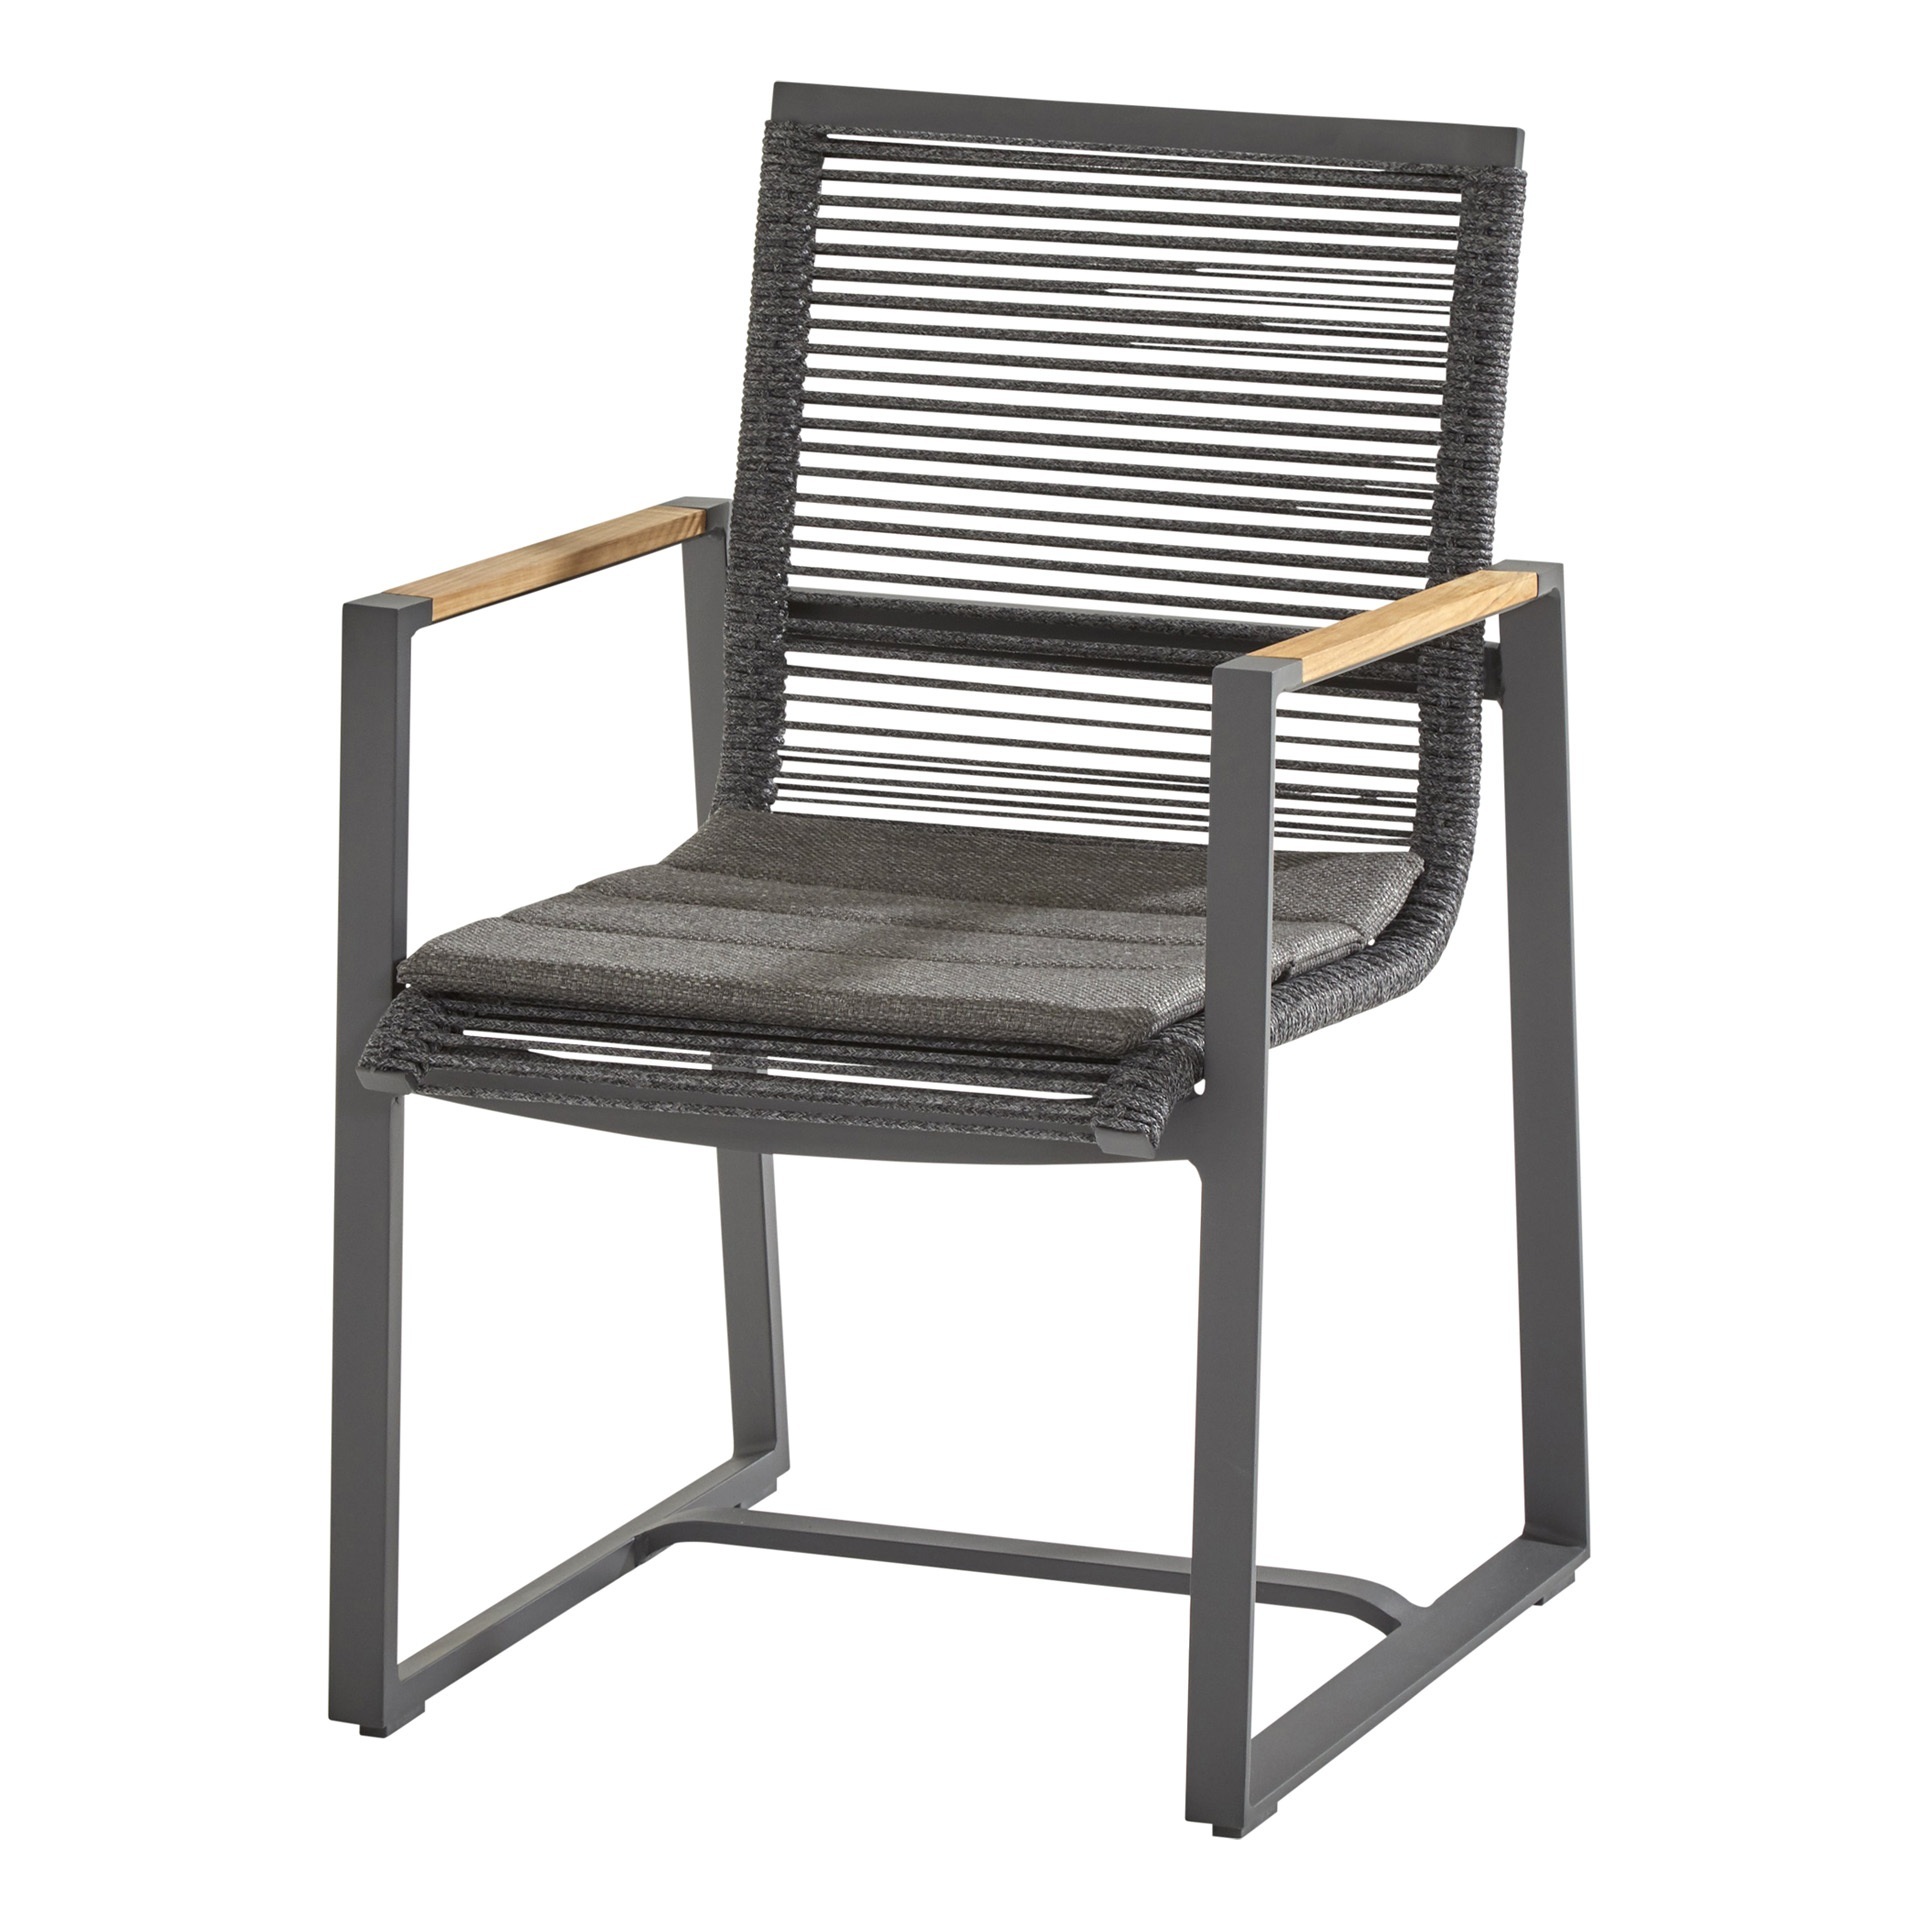 Pandino dining chair with cushion Antracite